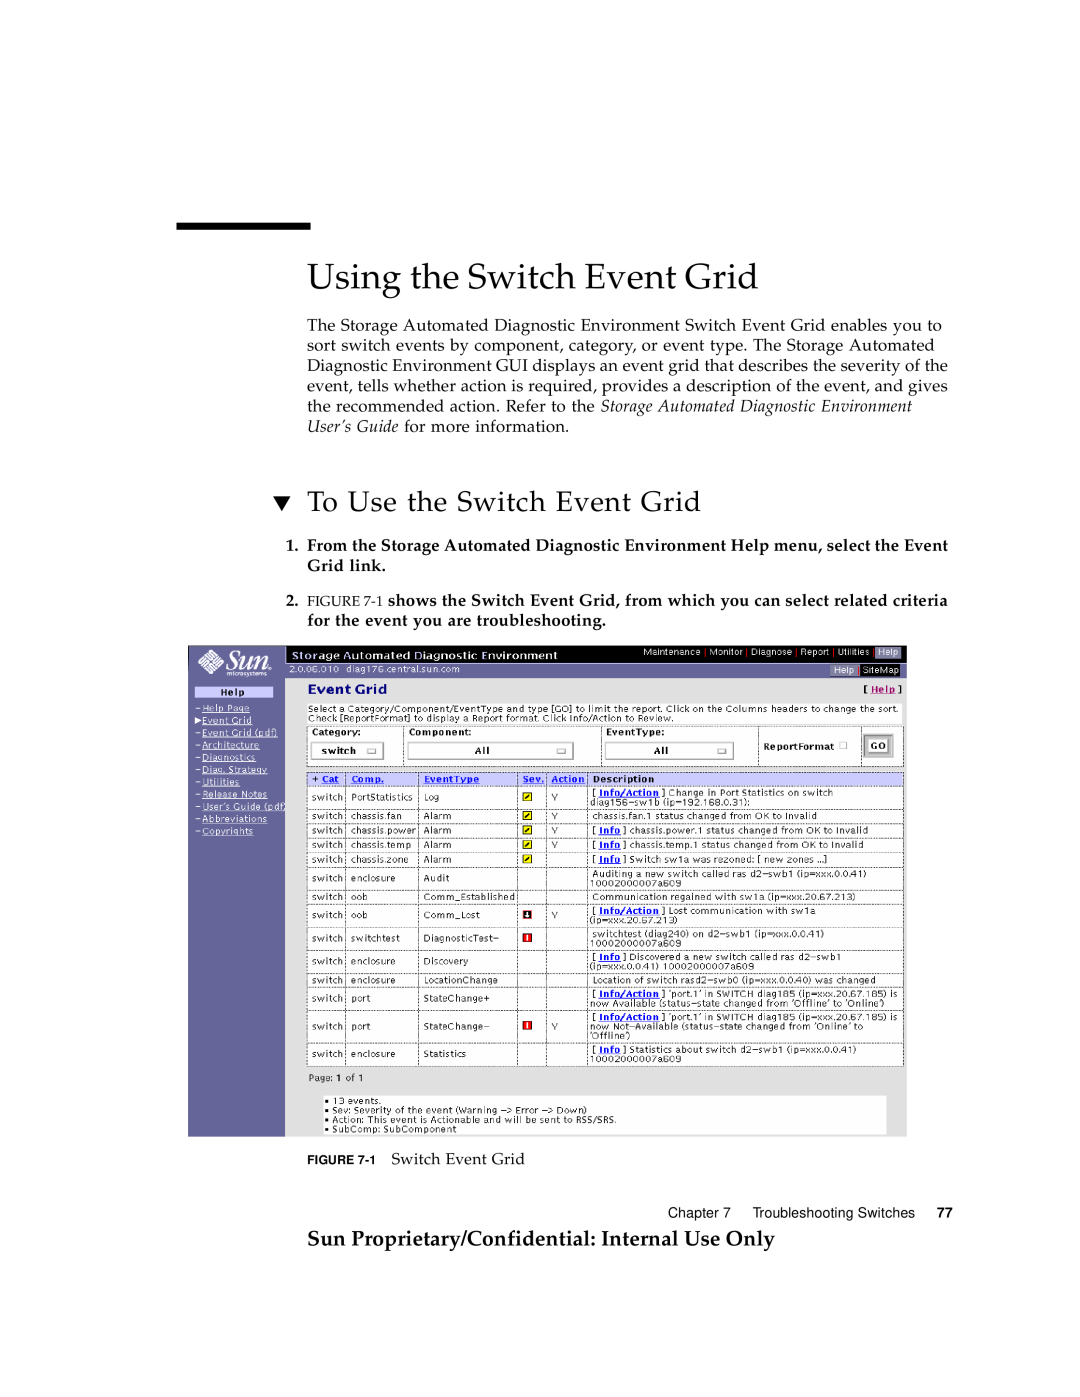 Sun Microsystems 6900, 3900 manual Using the Switch Event Grid, To Use the Switch Event Grid 